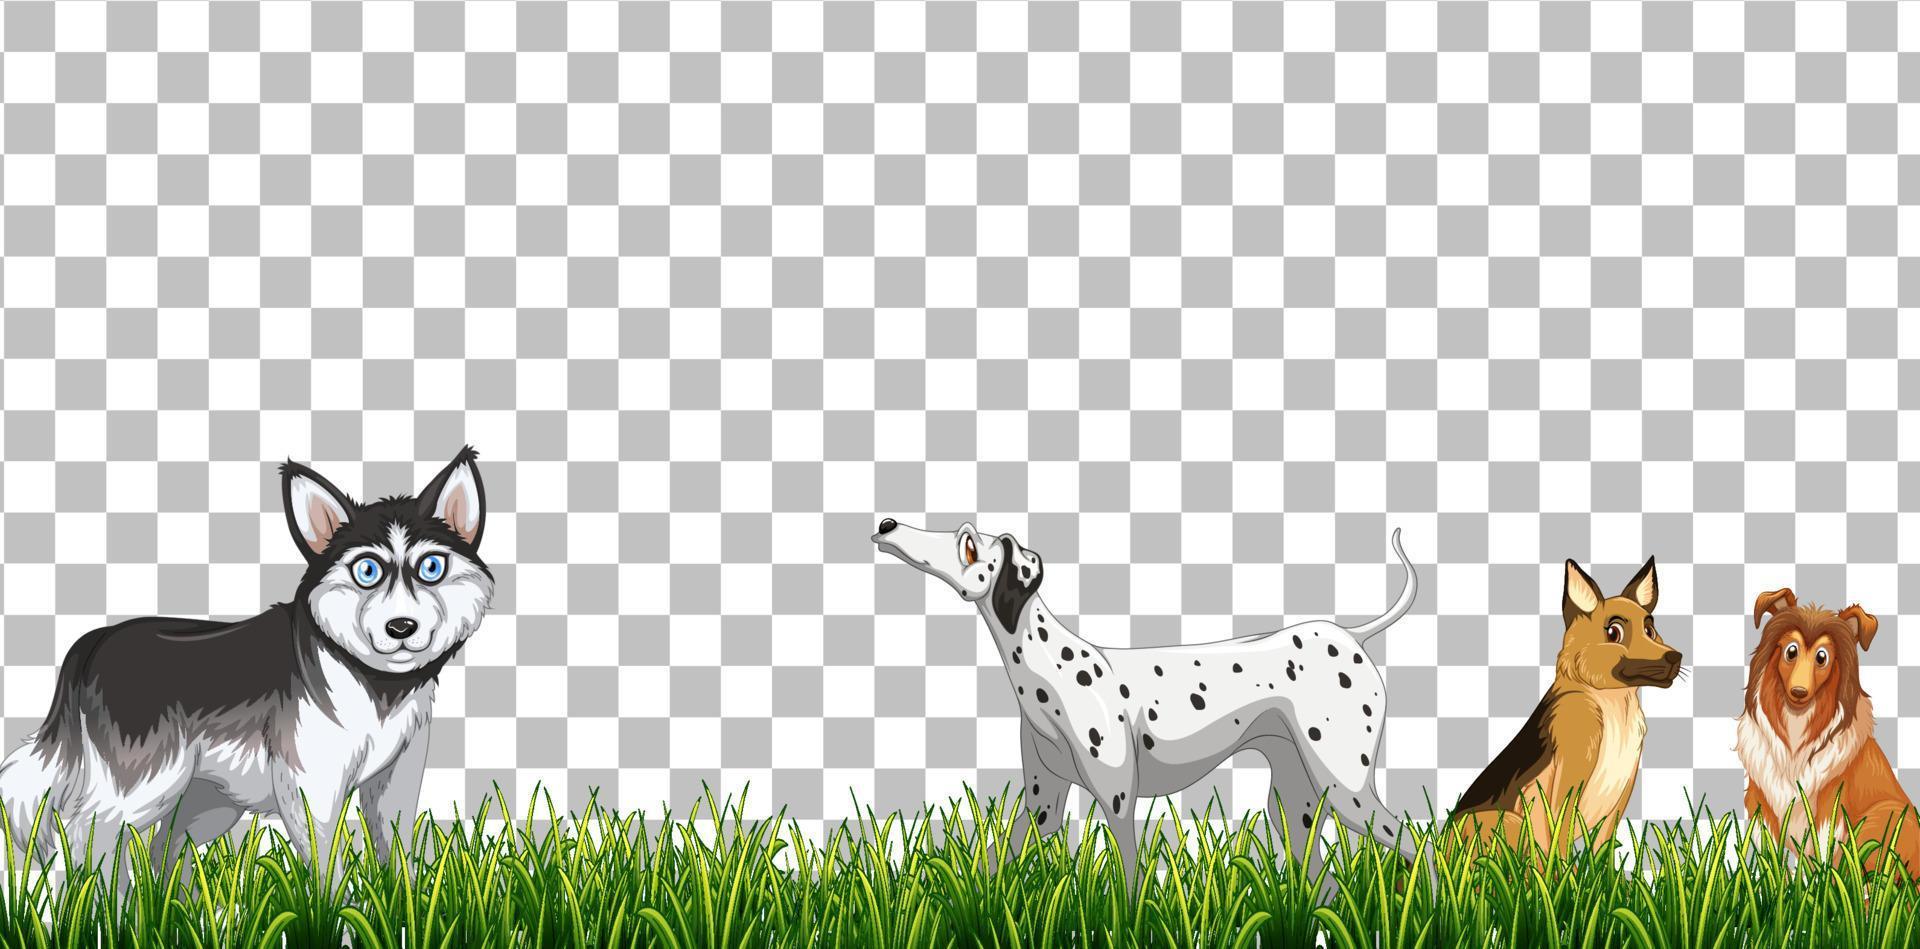 Domestic dogs cartoon character on grid background vector